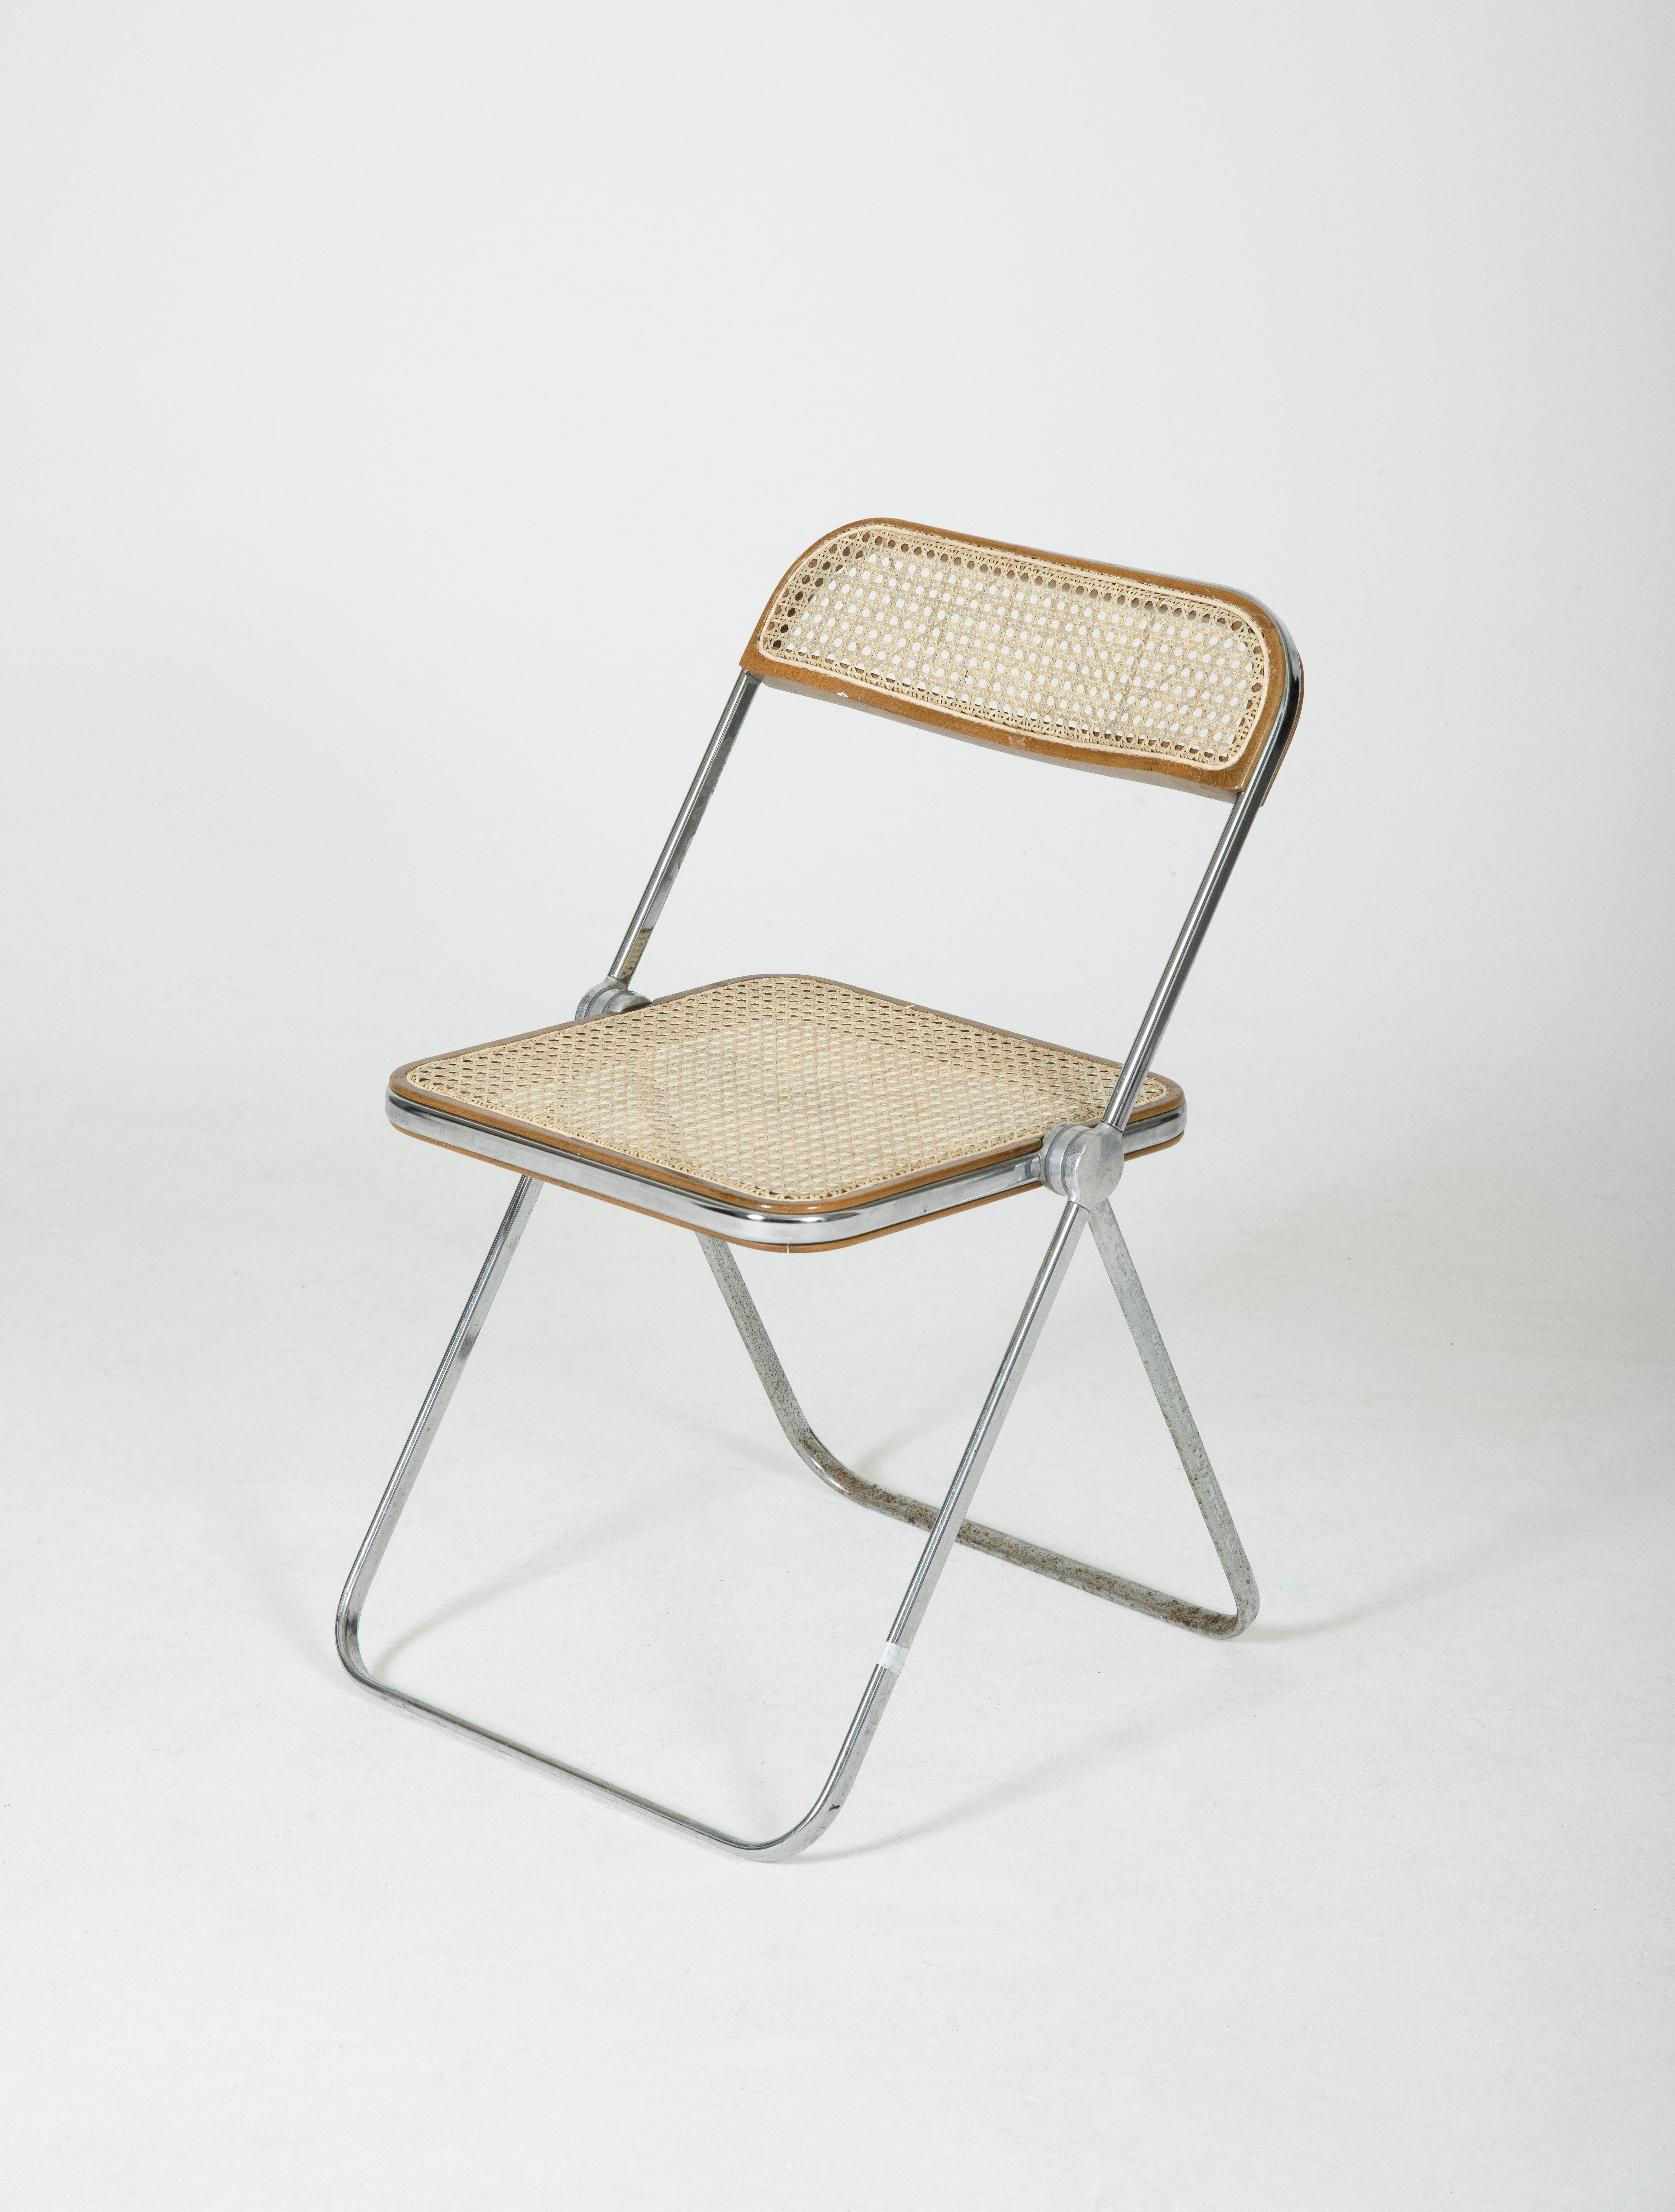 Plia chair by Giancarlo Piretti for Castelli in Italy in the 1960s. Chromed legs, back and seat in cane. Model of folding chair. The caning has been completely redone, some traces of wear on the base.